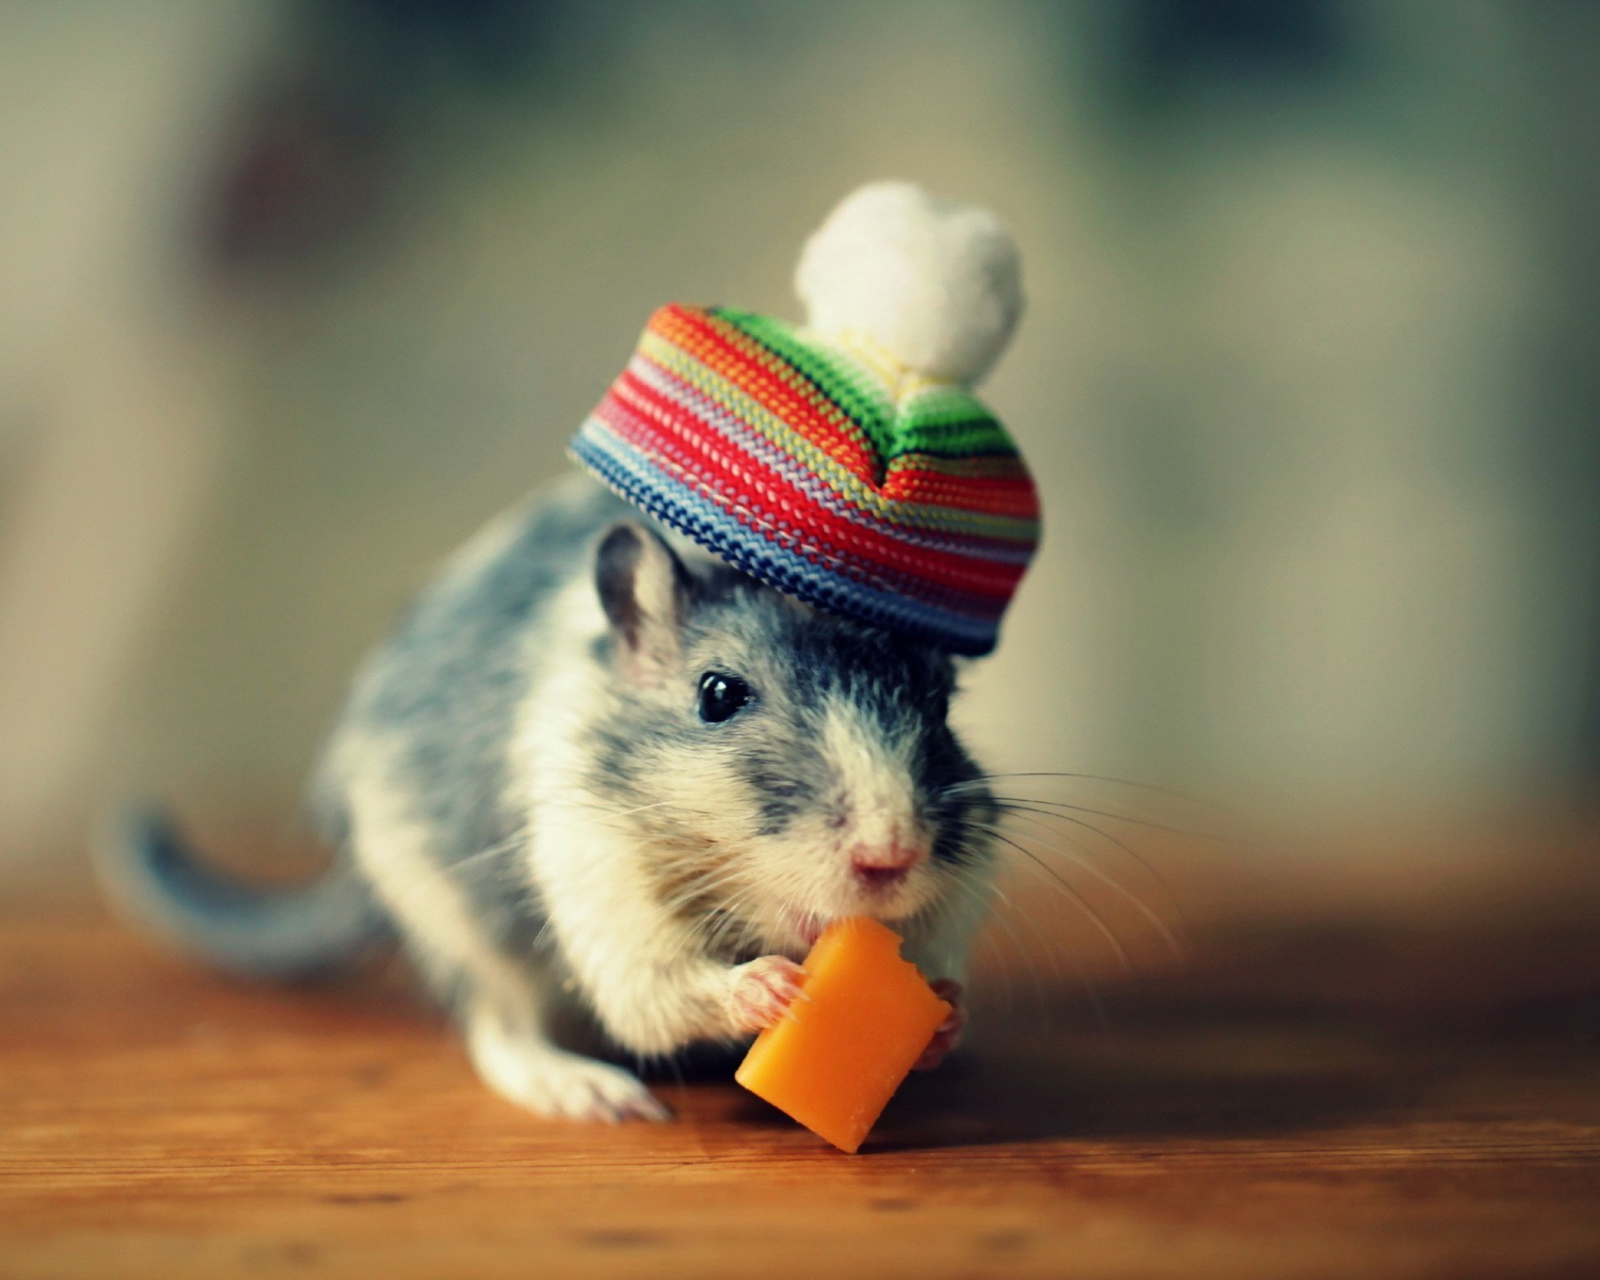 Mouse In Funny Little Hat Eating Cheese wallpaper 1600x1280